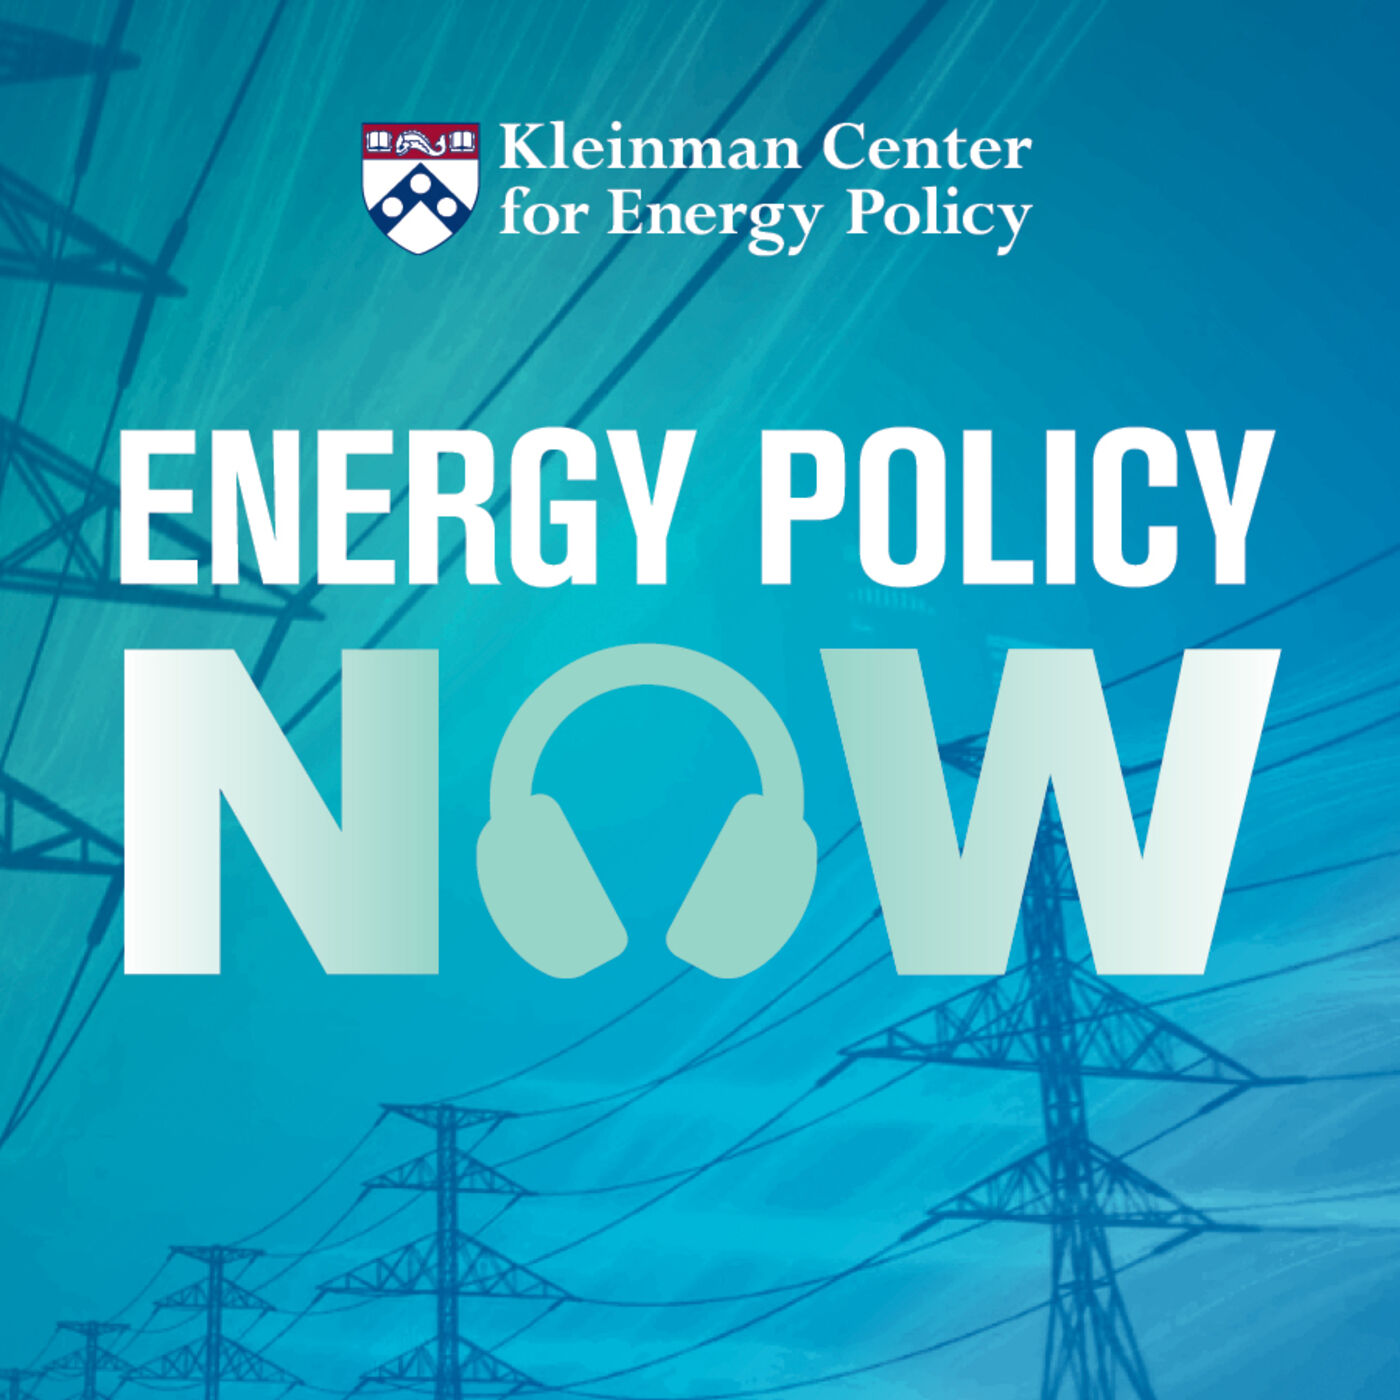 Combating Energy Poverty in the U.S.